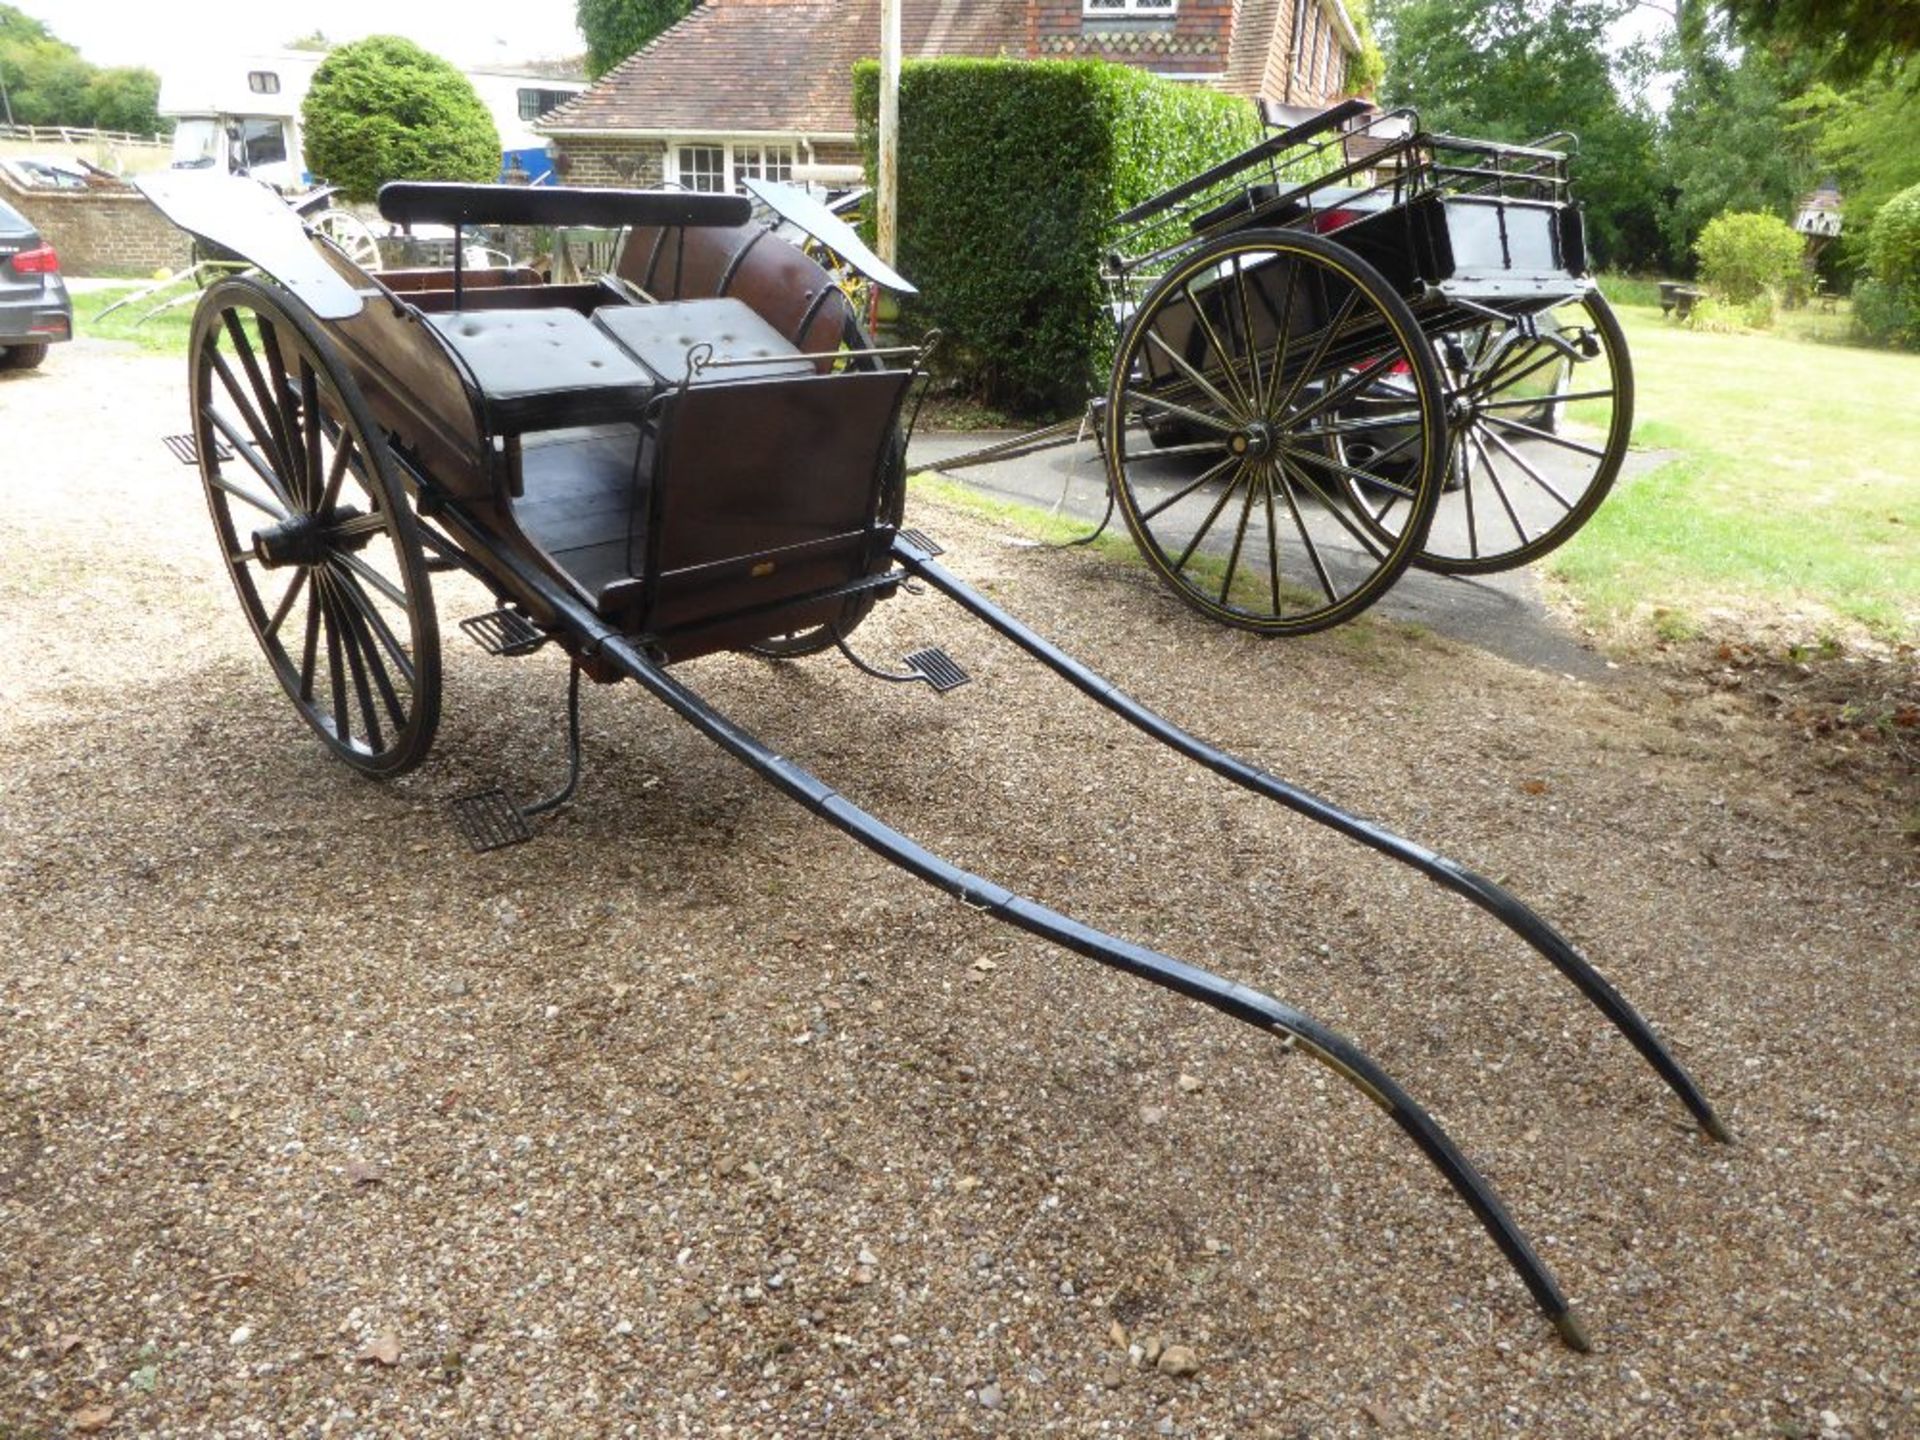 MARKET CART built by Vincents of Reading, to suit 13 to 15hh. The body is in natural varnished wood